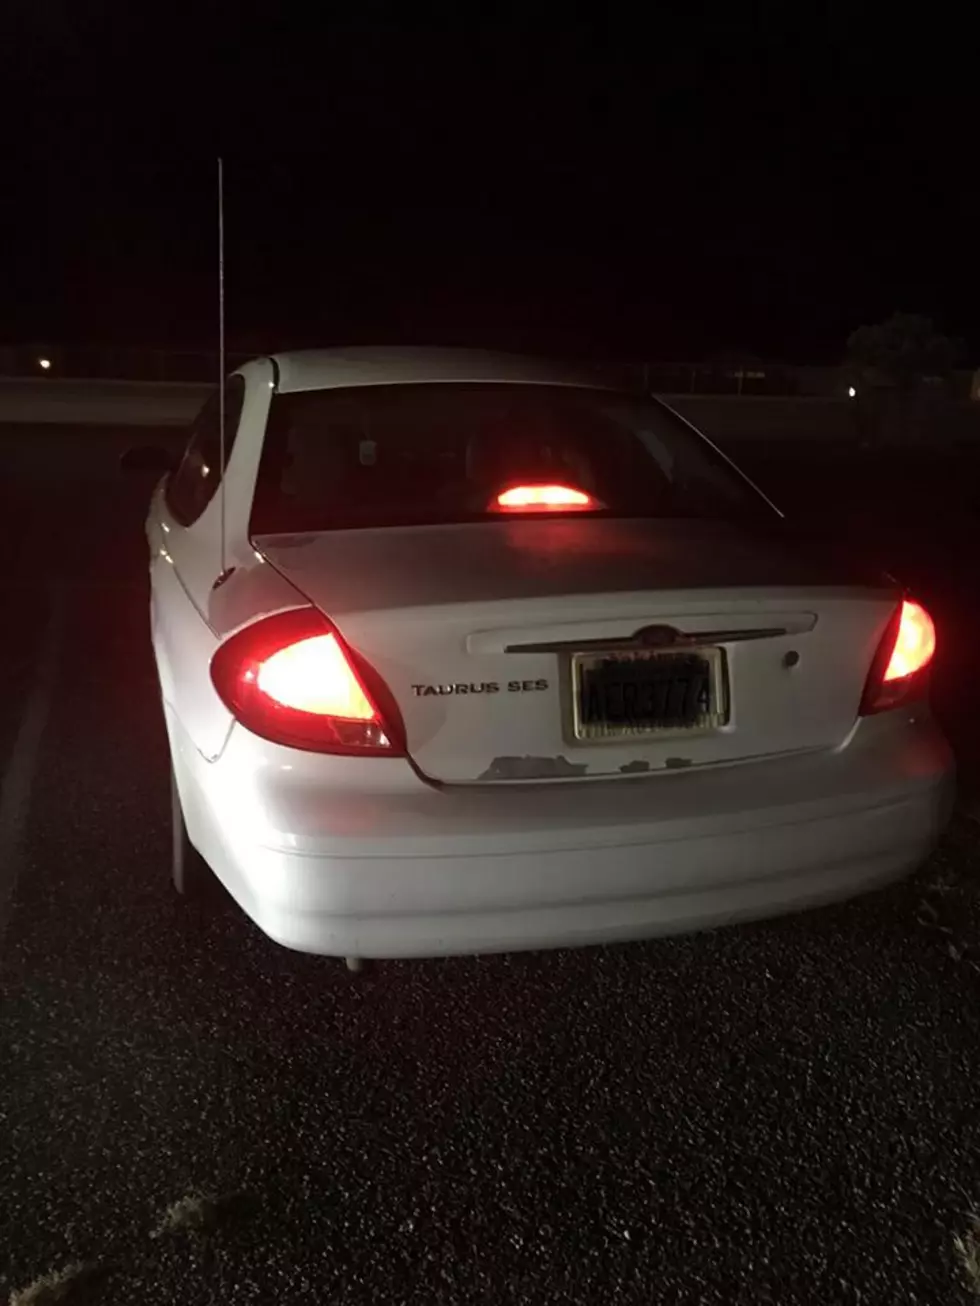 ‘Weird’ Behavior of Driver in Parking Lot Results in Bust